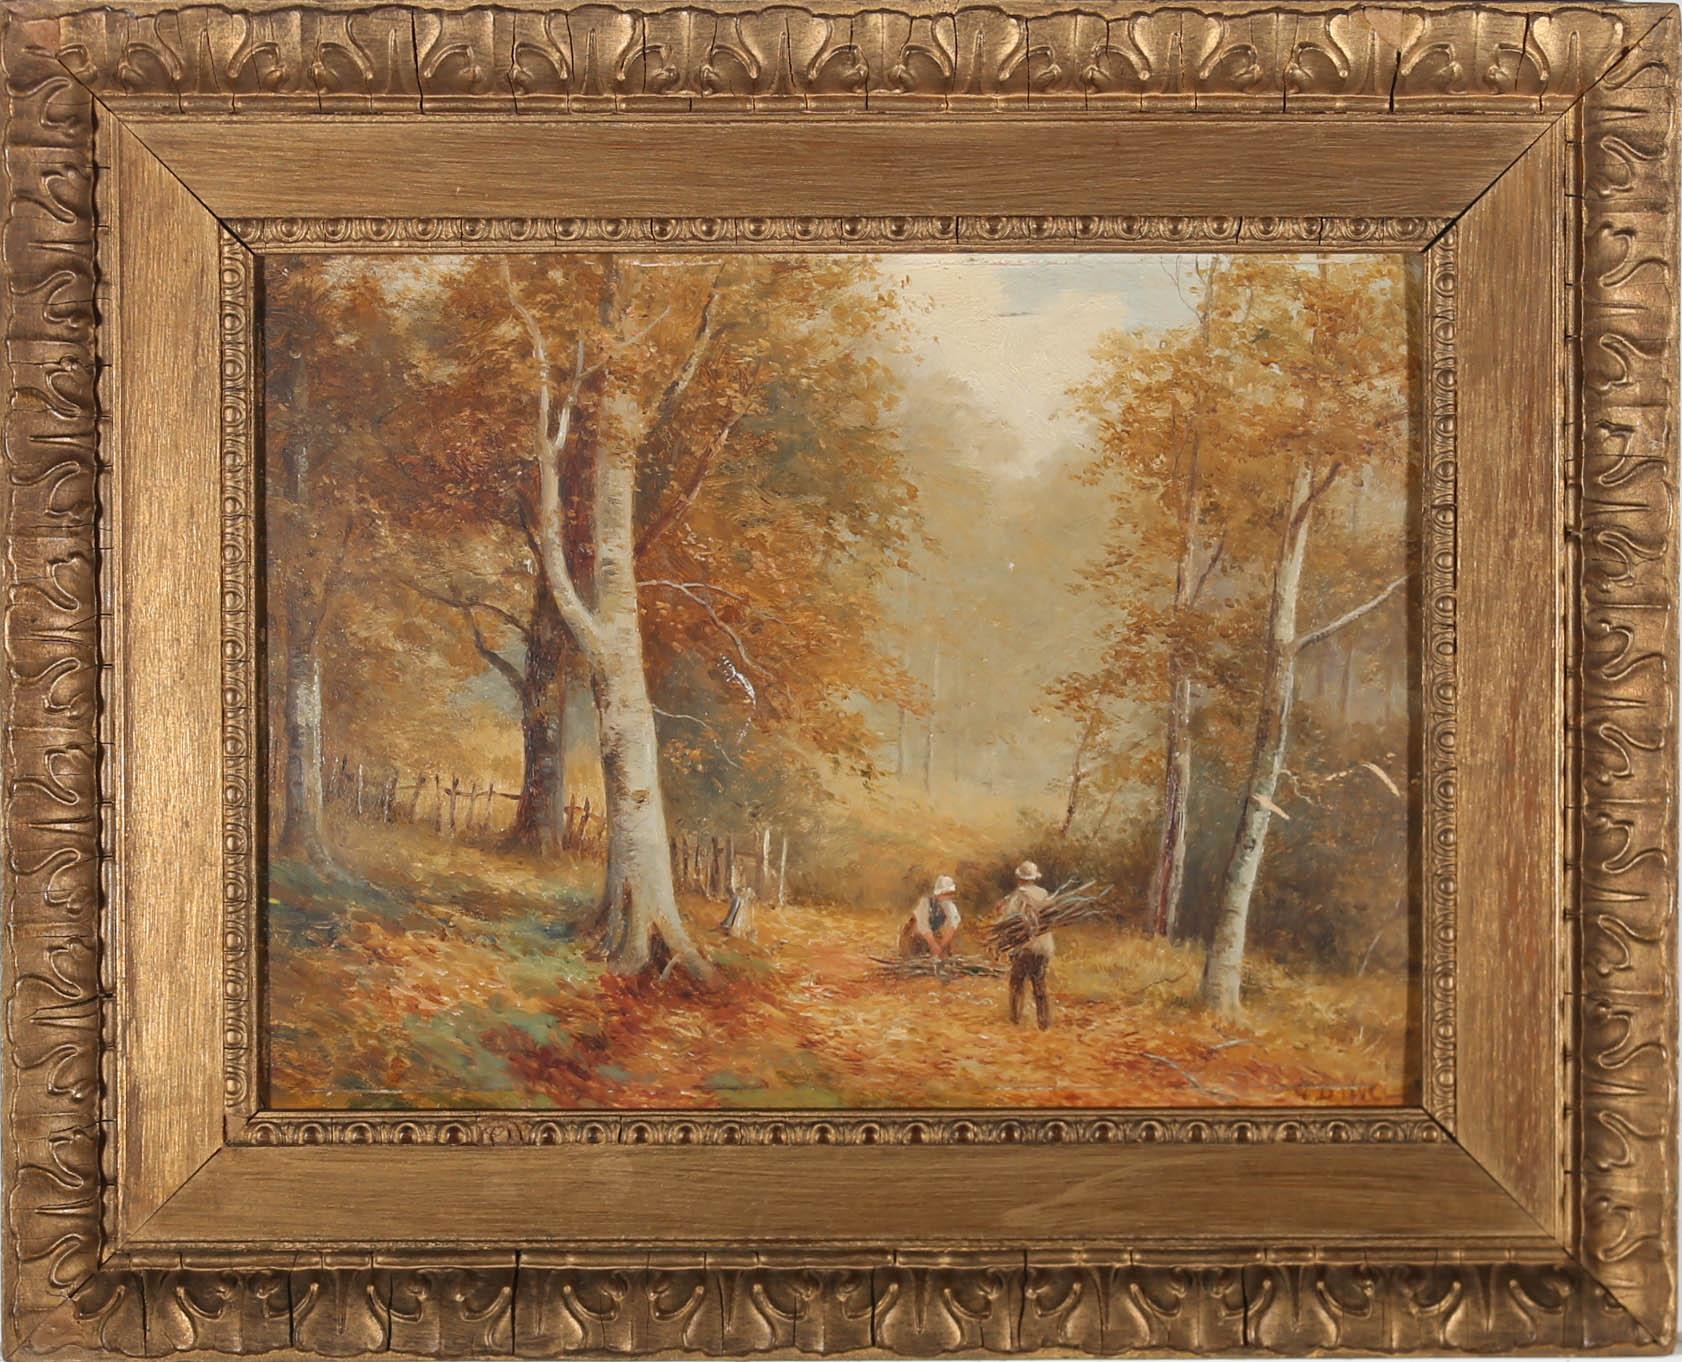 A fine oil painting by Victorian artist John Bates Noel (1870-1927), depicting a country couple collecting bundles of firewood between broadleaf beech trees. Signed by the artist to the lower right. With the artist's signature and title verso. Well